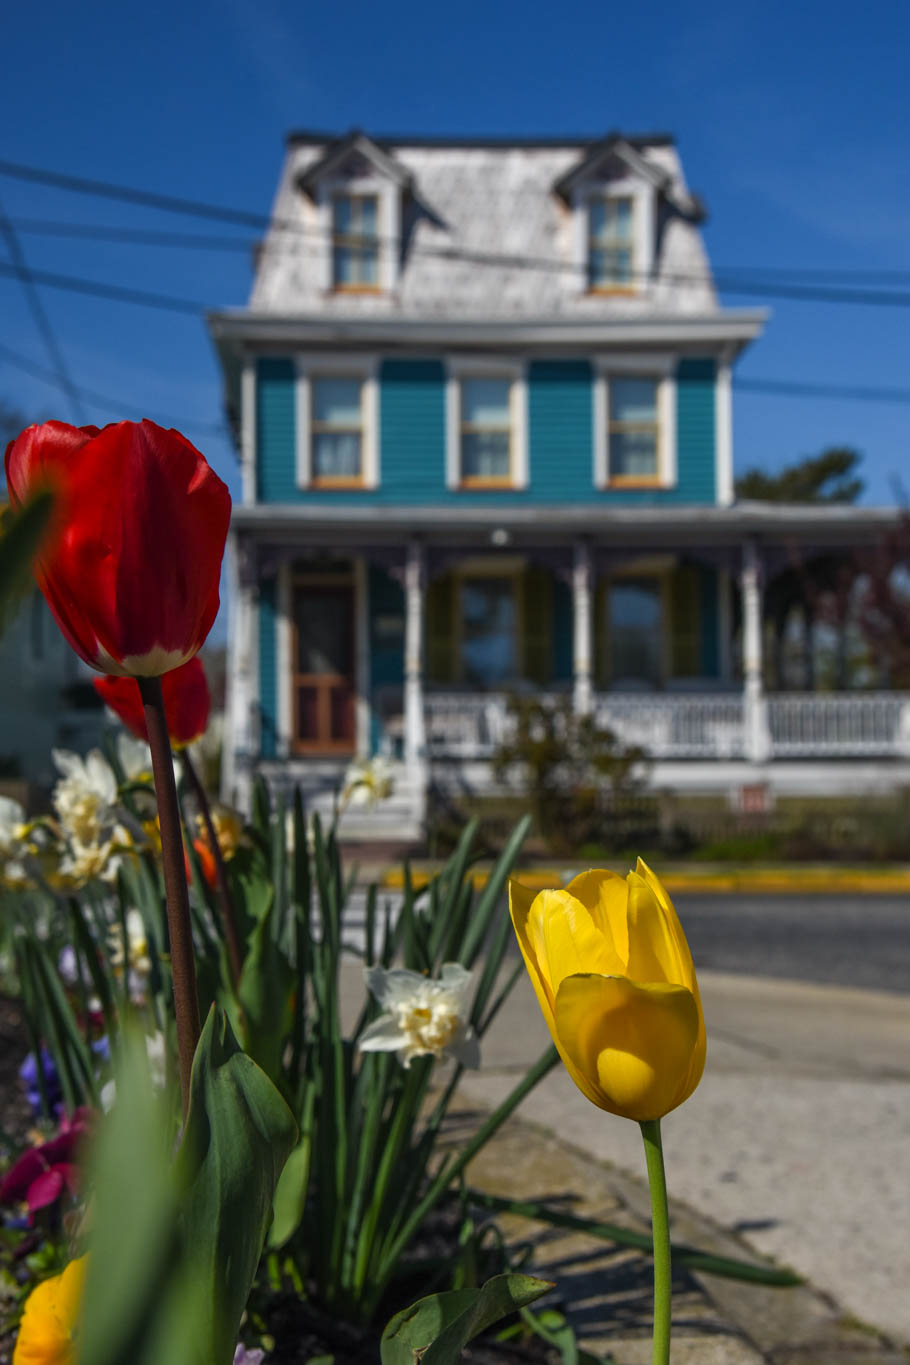 Perry St & Jackson St where the City of Cape May Sign is looking at flowers and a house